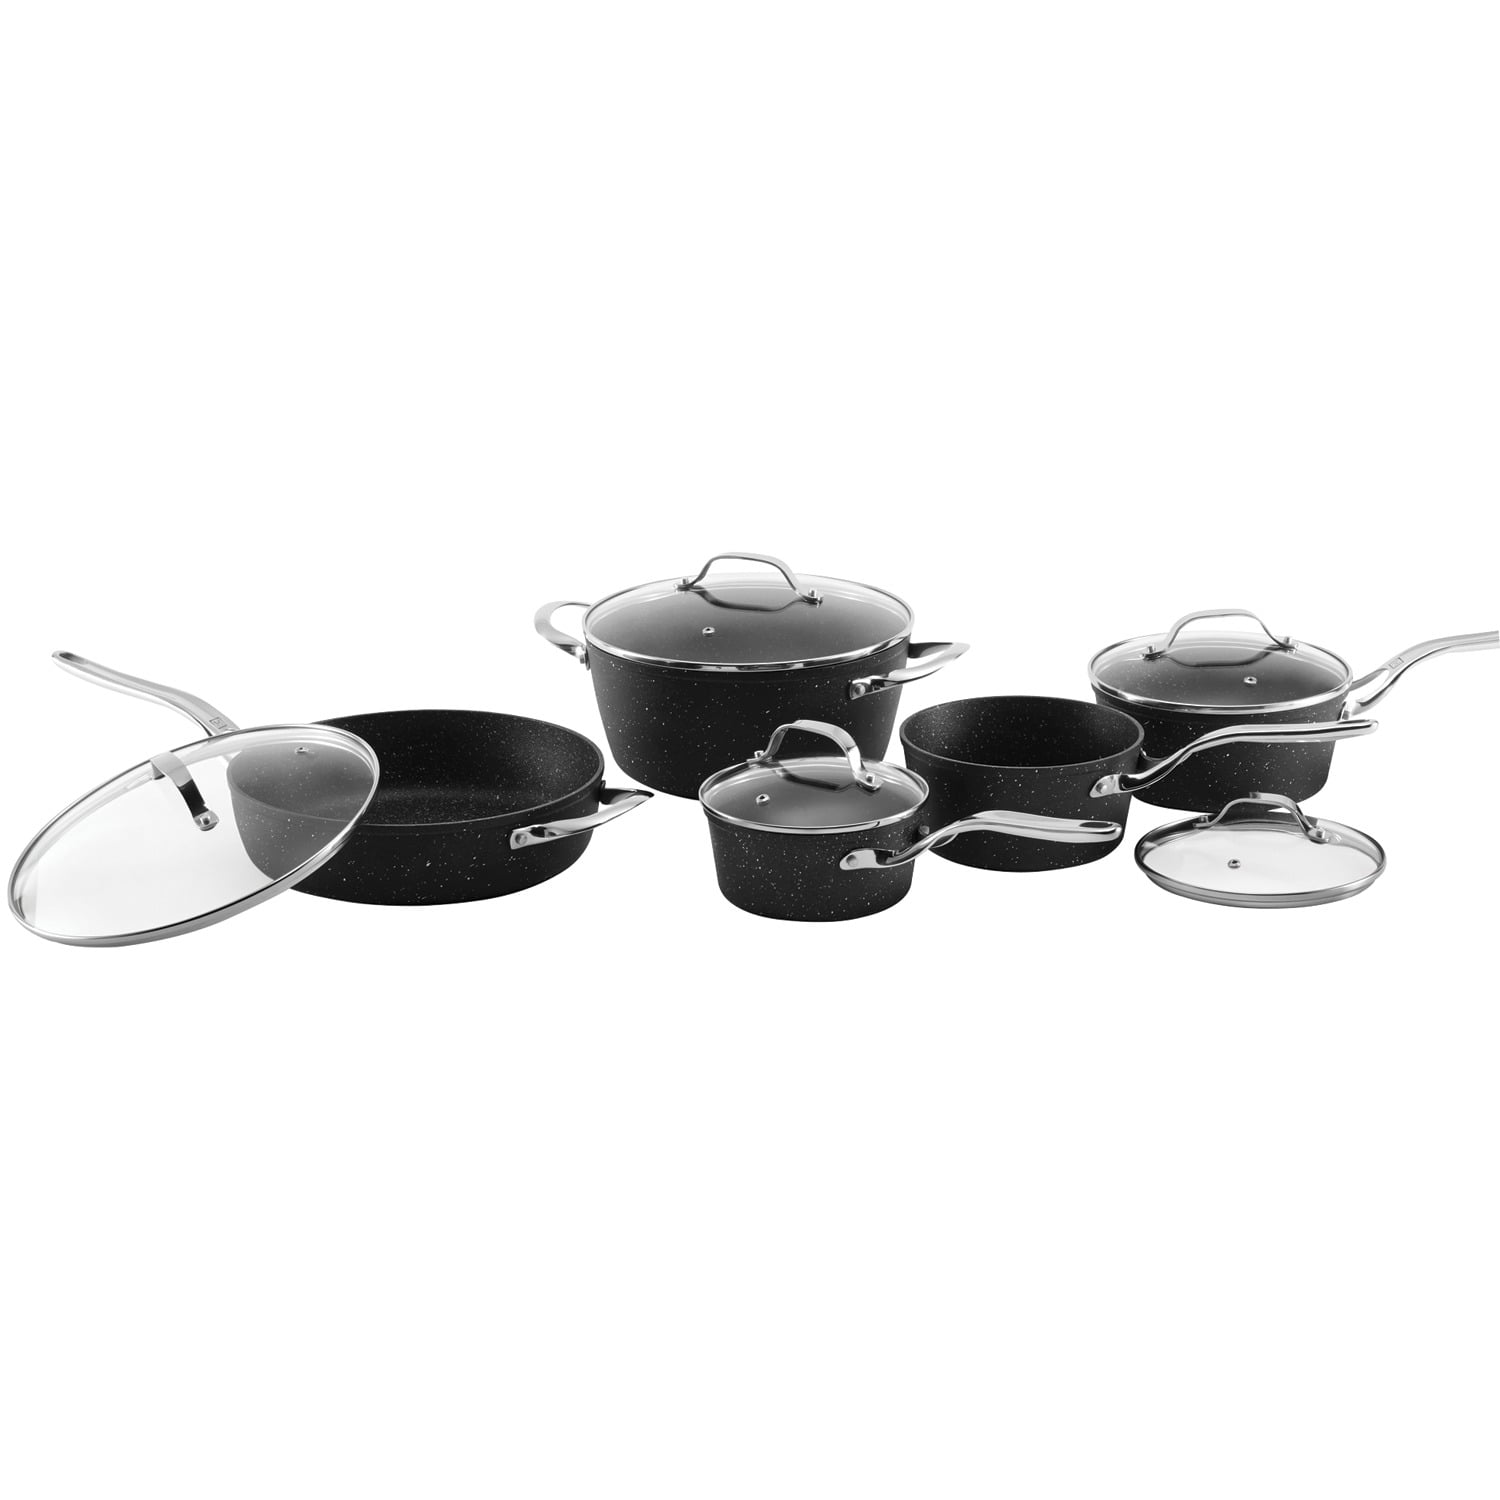 THE ROCK by Starfrit 060711-001-0000 3-Piece Cookware Set 